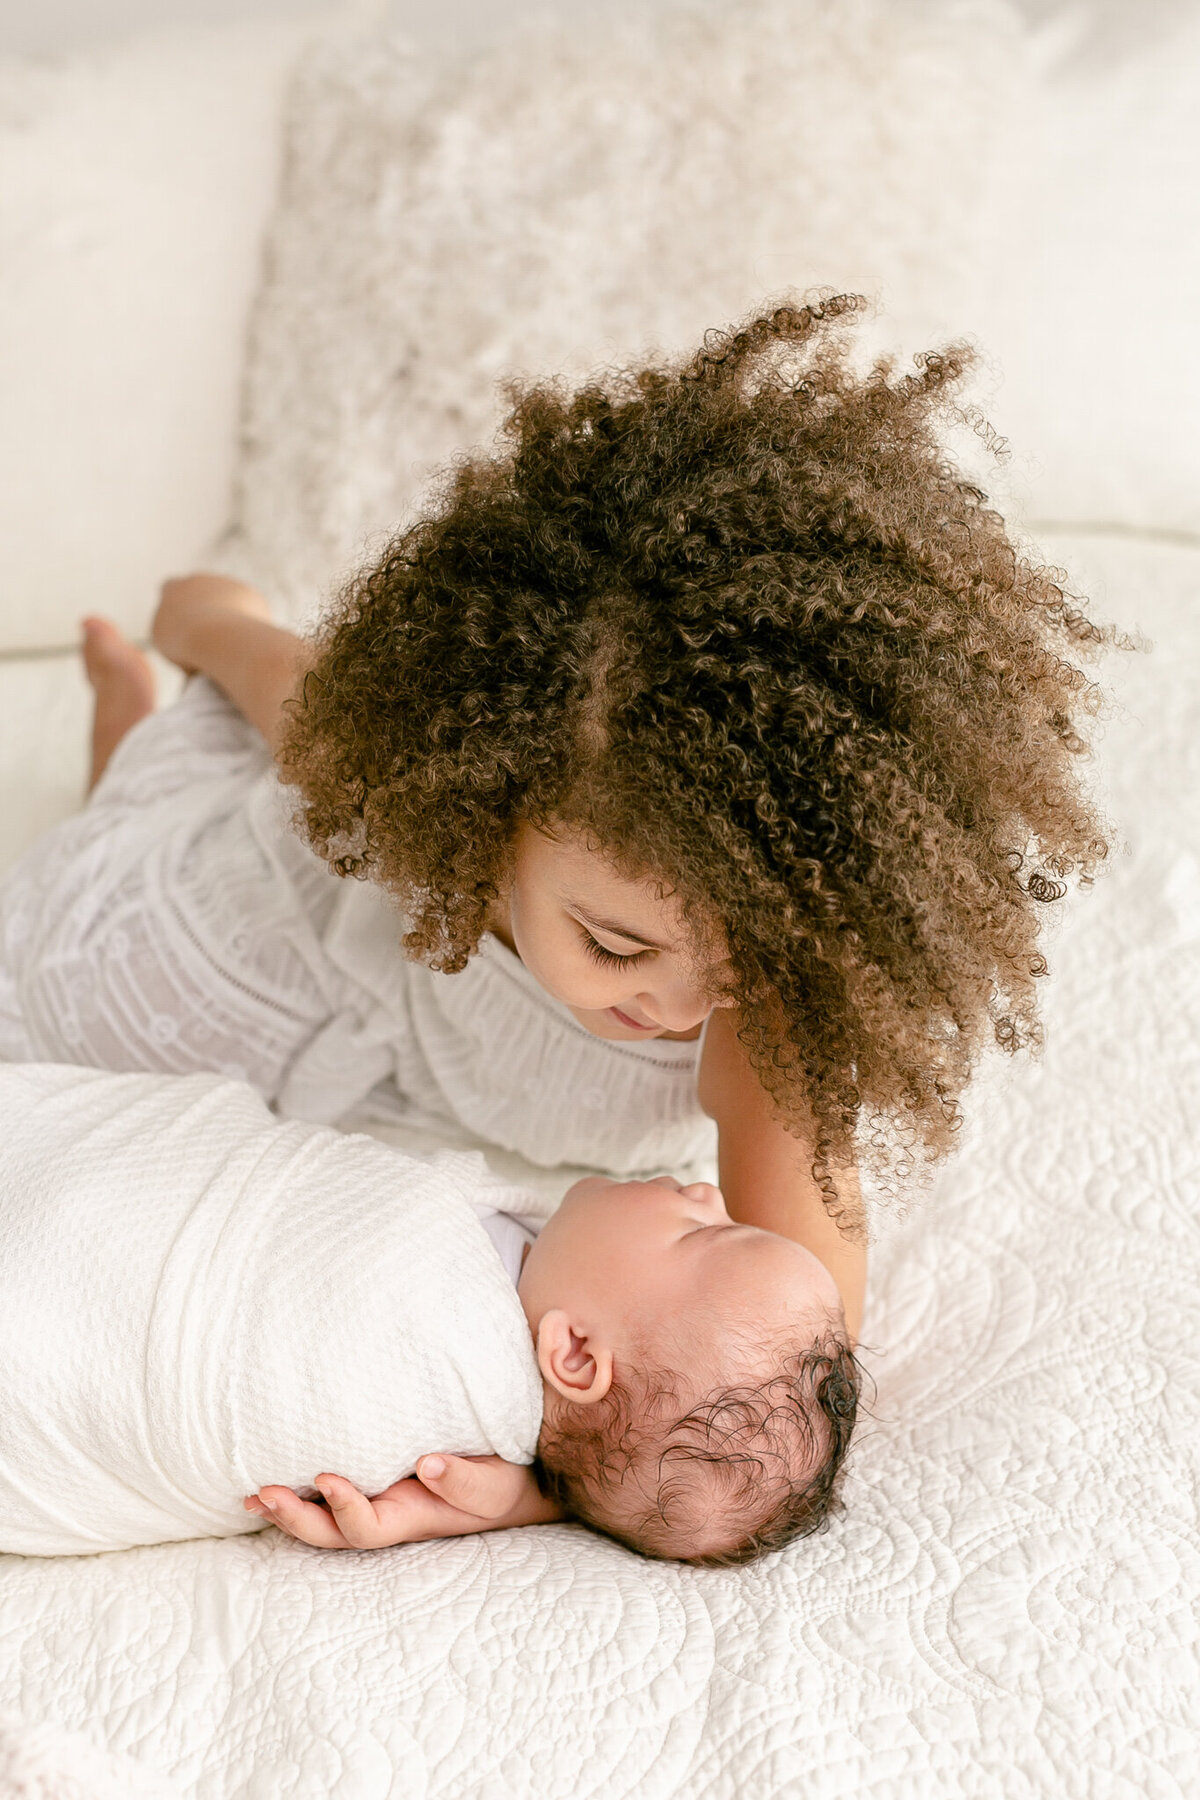 Sibling photo of older sister and newborn baby. Sister is about 4 years old and has dark curly hair, she is looking down at her brother and he is wrapped up in a white swaddle and looking back up at her. Image taken during newborn photography session in SE Portland.